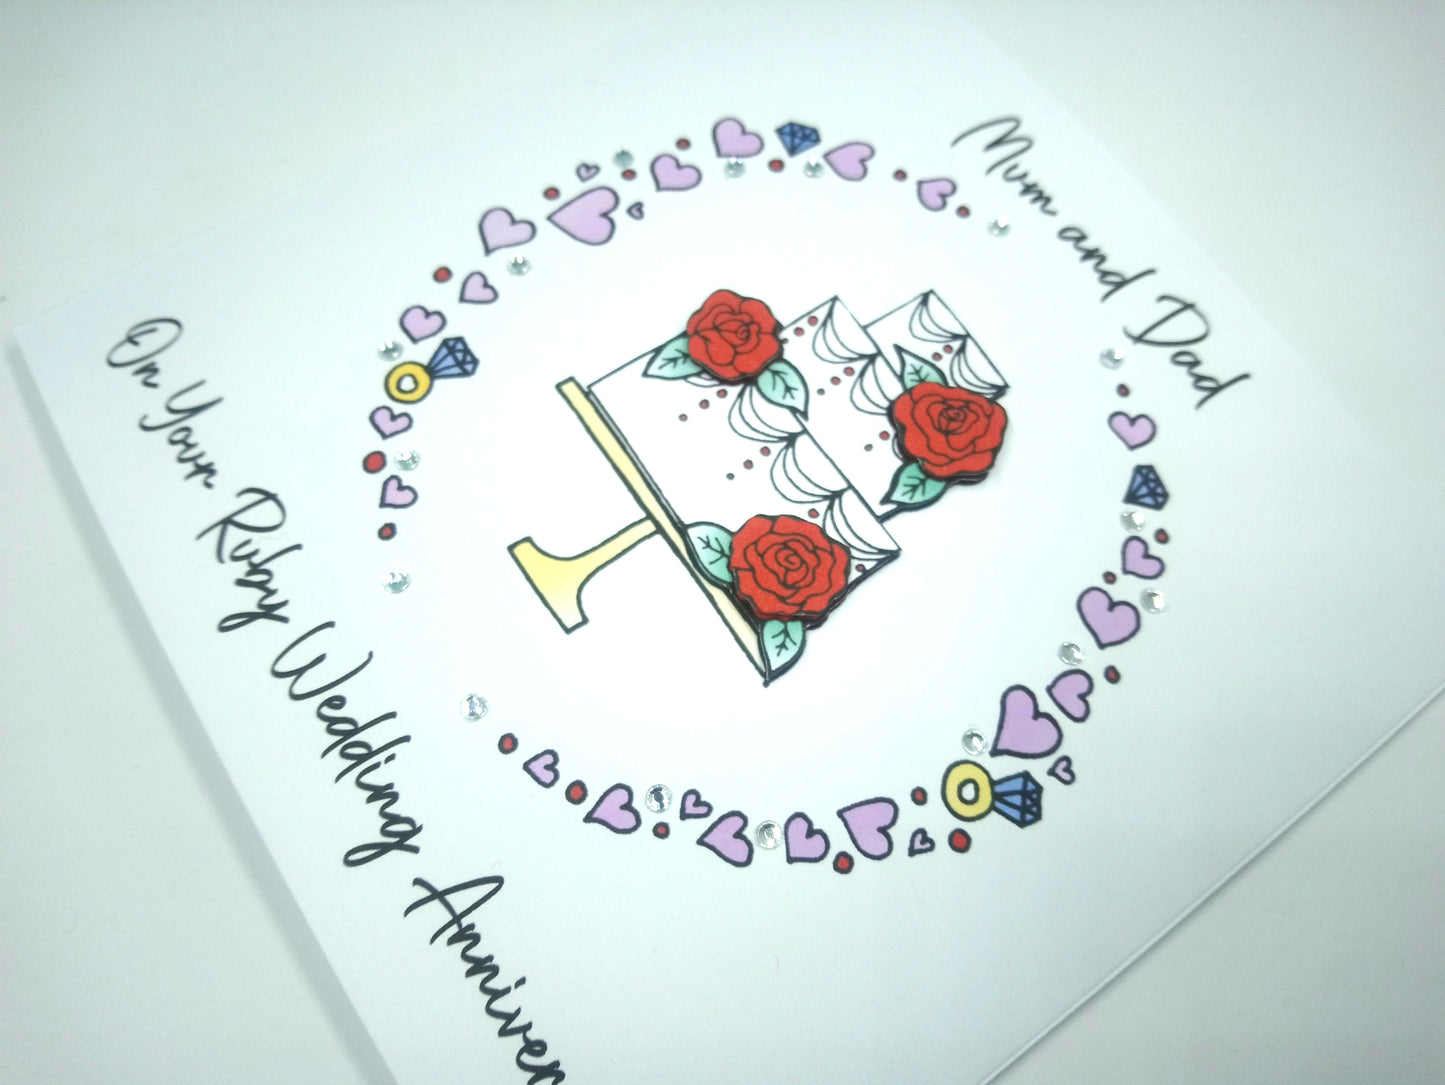 PERSONALED Ruby Wedding Anniversary  Card